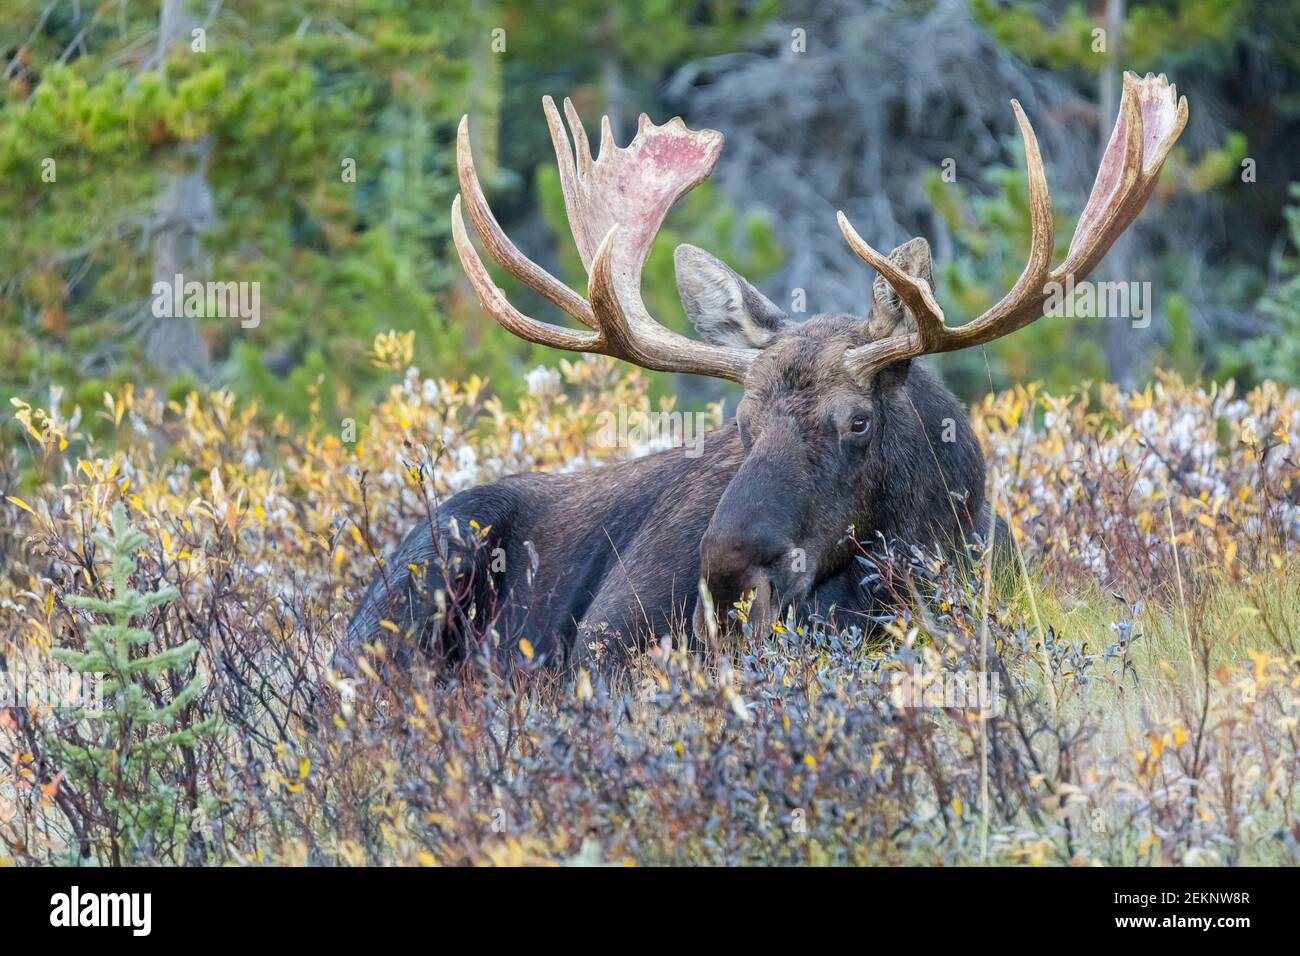 Bull Moose (Alces alces) with big antlers laying down on tall grass, resting during fall rutting season in the Canadian Rockies Stock Photo